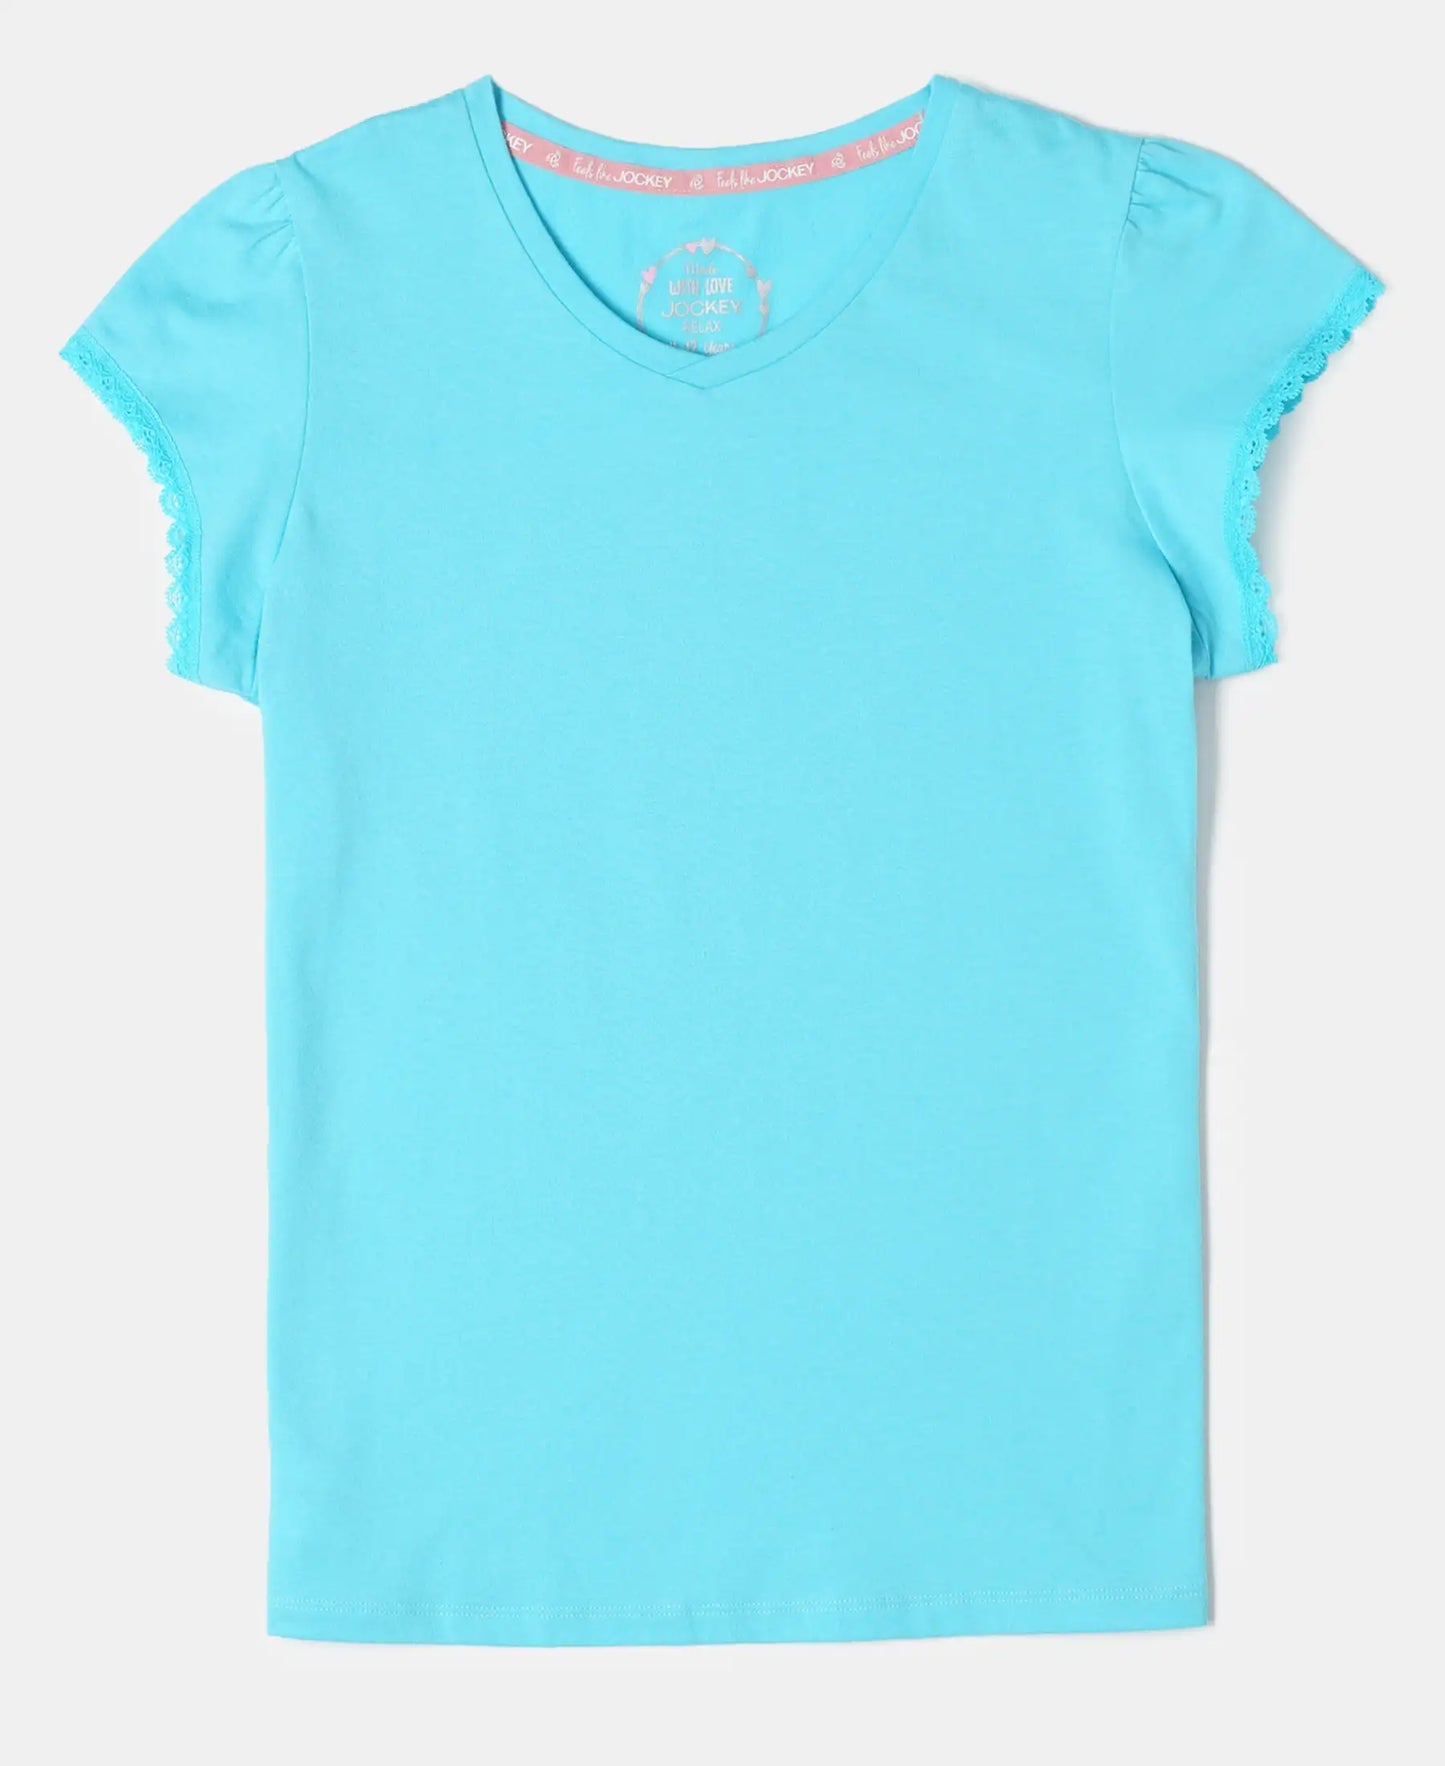 Super Combed Cotton Solid Short Sleeve T-Shirt - Blue Curacao-1